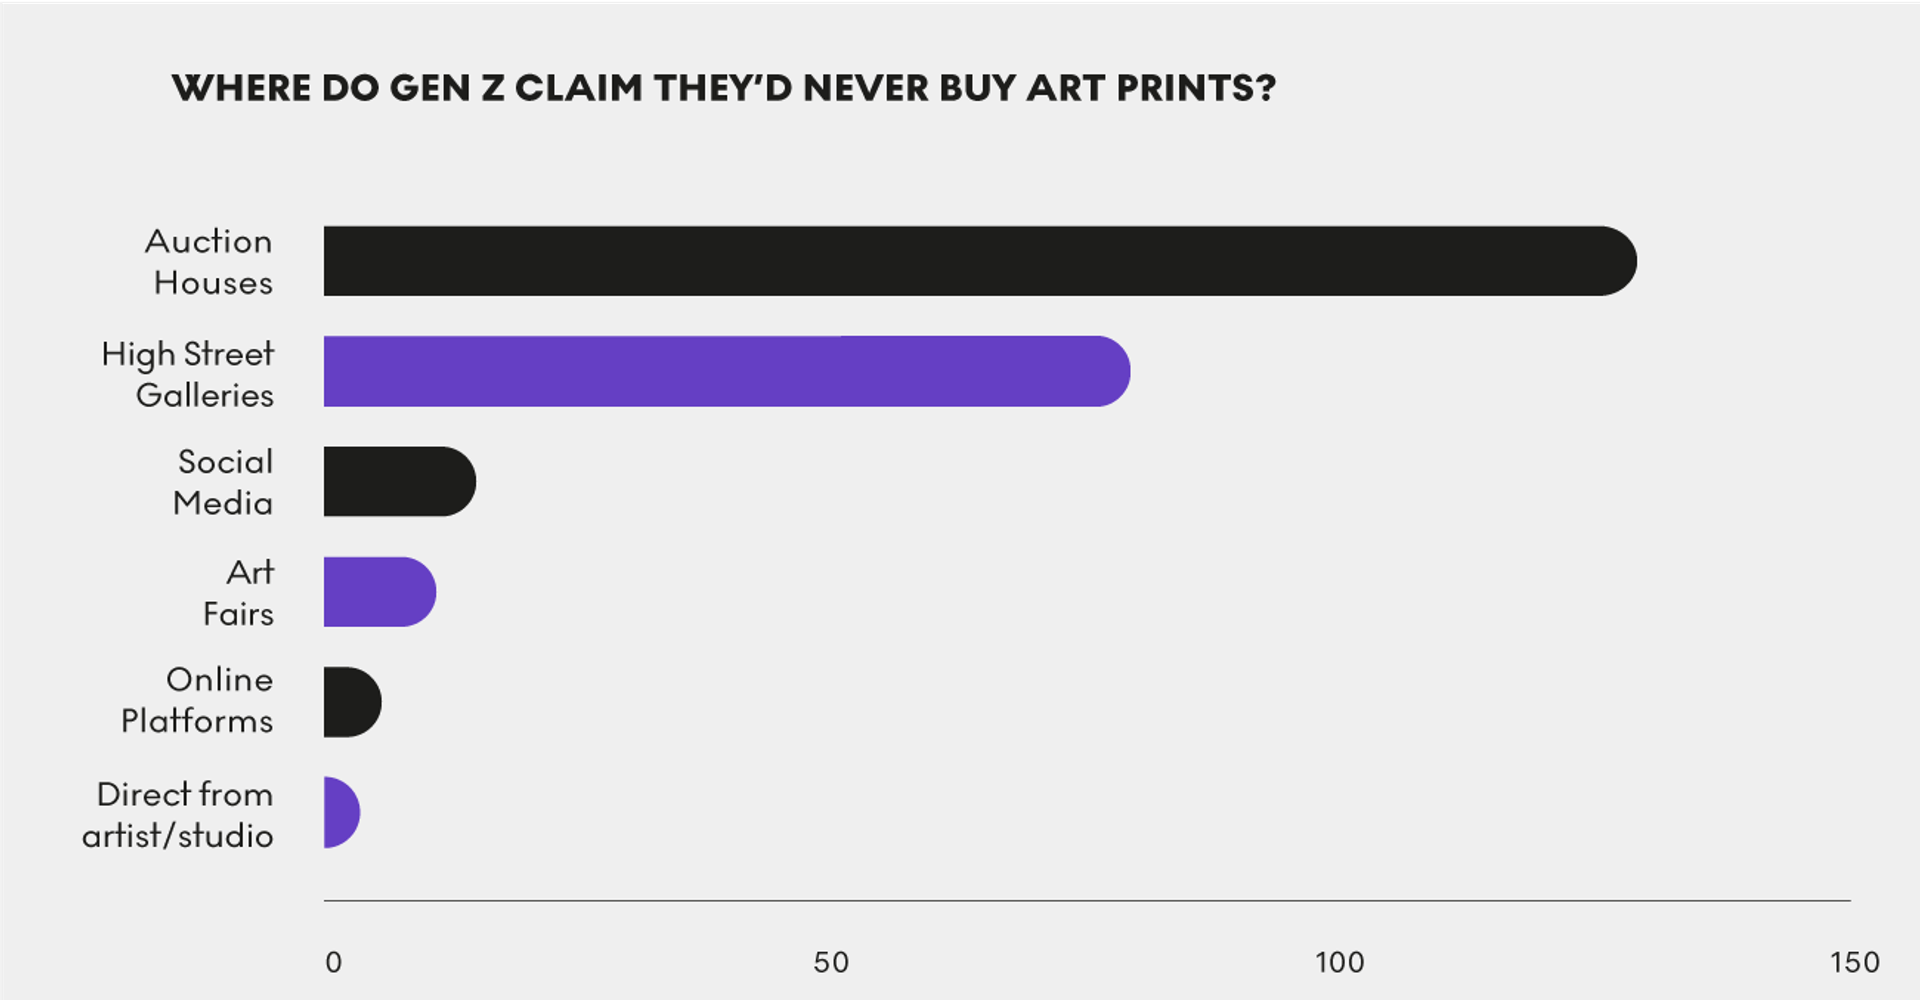 A graph showing where Gen Z claim they'd never buy art prints from